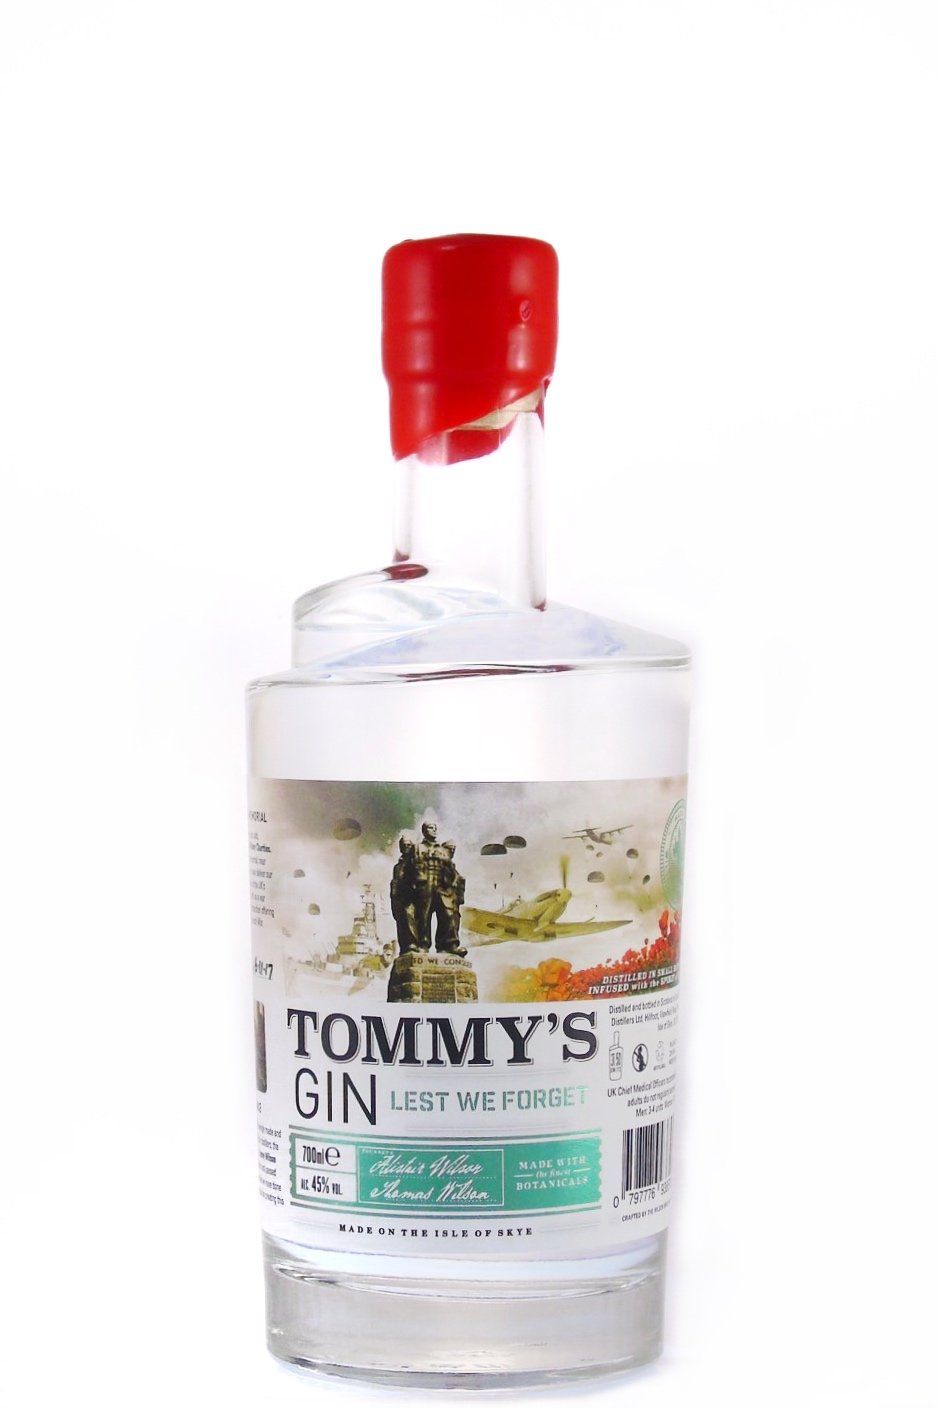 Tommy's Gin Gins & Gin Liqueurs